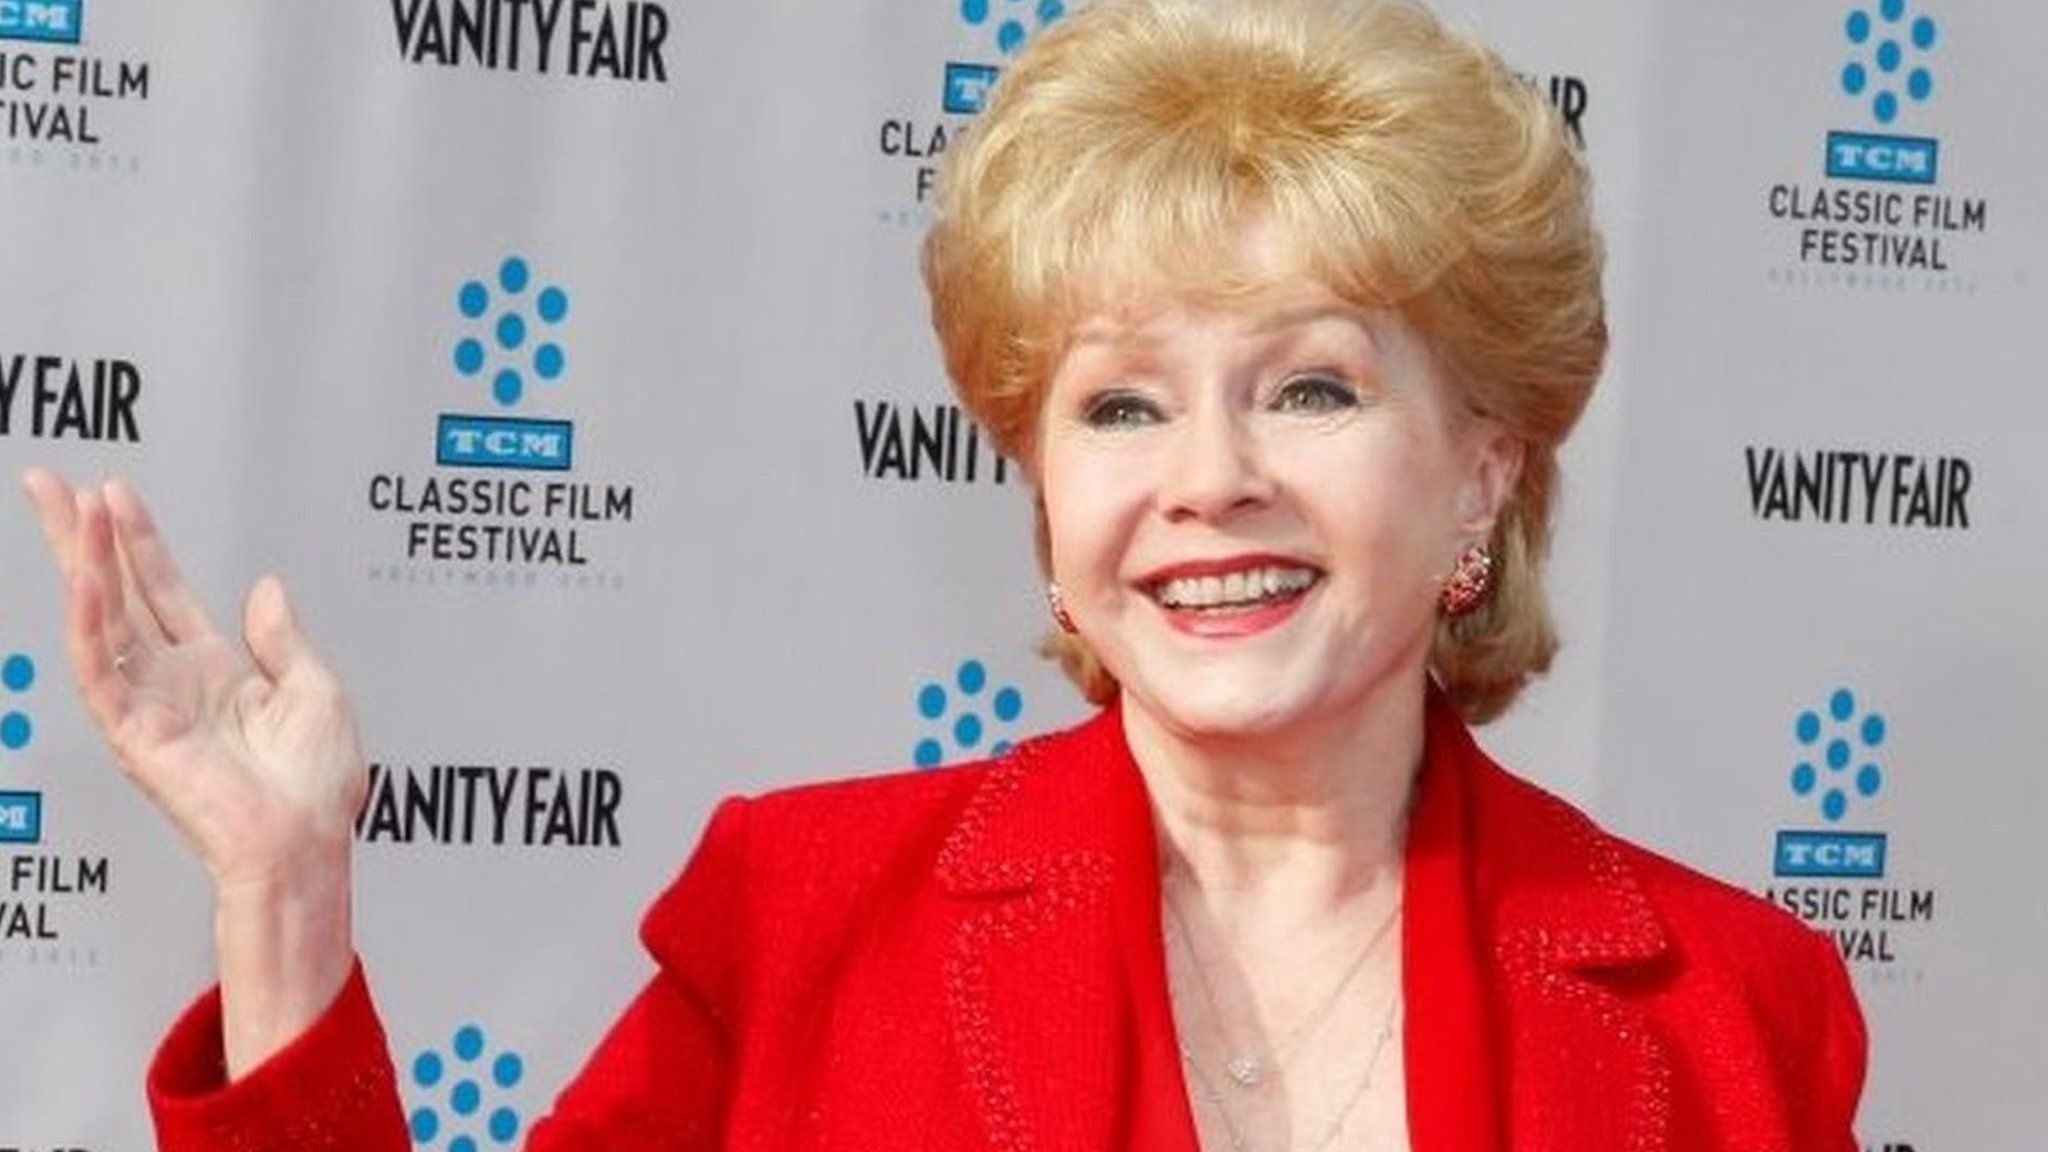 Actress Debbie Reynolds arrives at the world premiere of the 40th anniversary restoration of the film "Cabaret" during the opening night gala of the 2012 TCM Classic Film Festival in Hollywood, California April 12, 2012